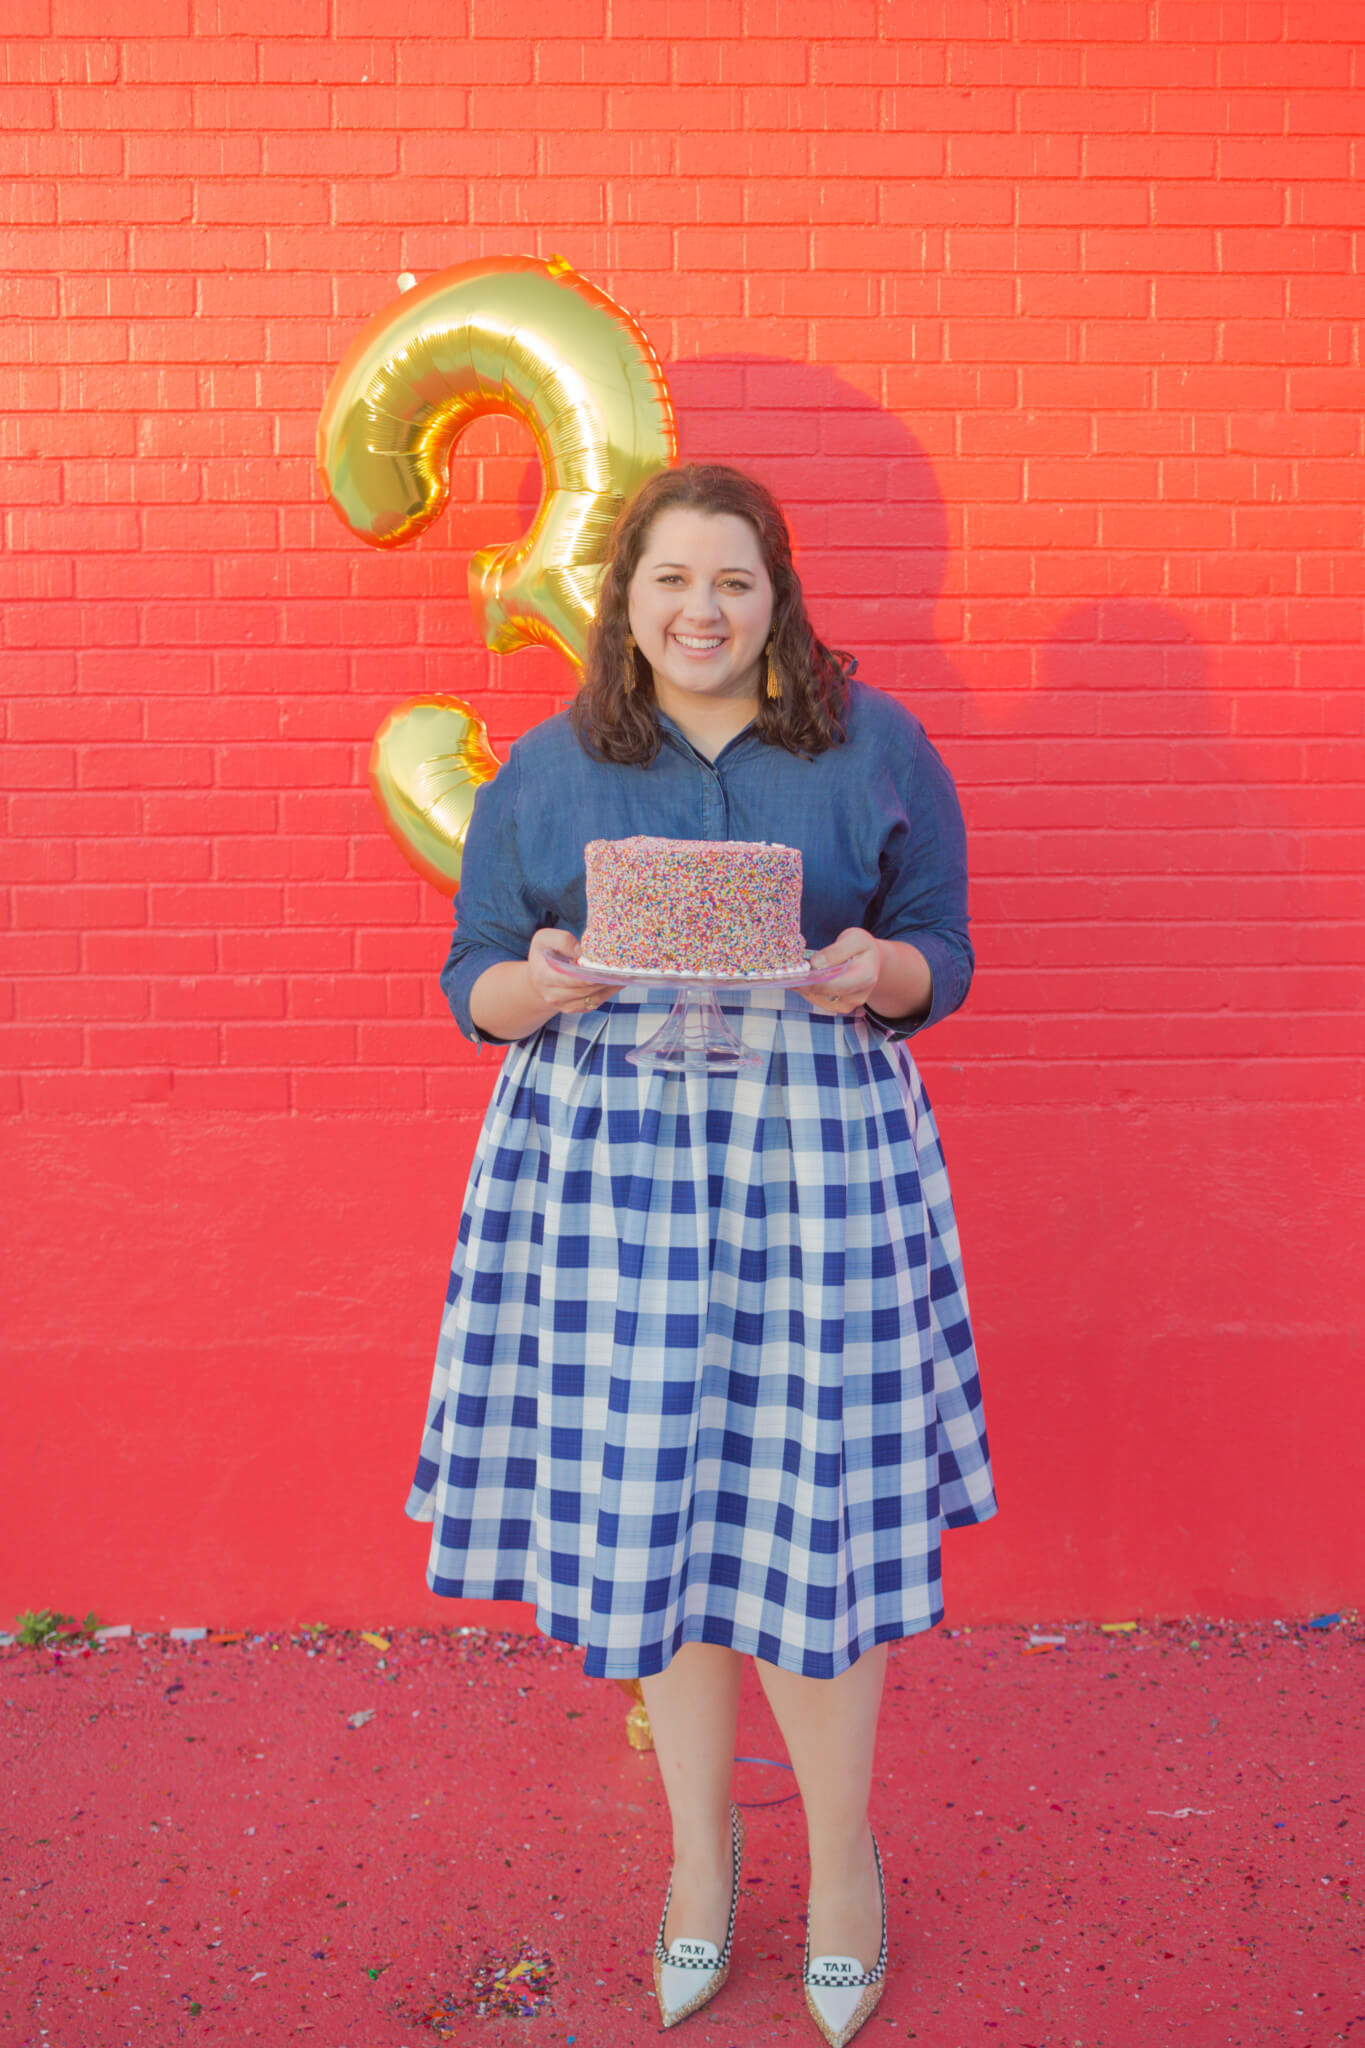 It's been such a fun journey these past 3 years blogging on Something Gold, Something Blue. Thank you to everyone for all of your amazing support throughout this journey! |Something Gold, Something Blue a curvy fashion blog by Emily Bastedo